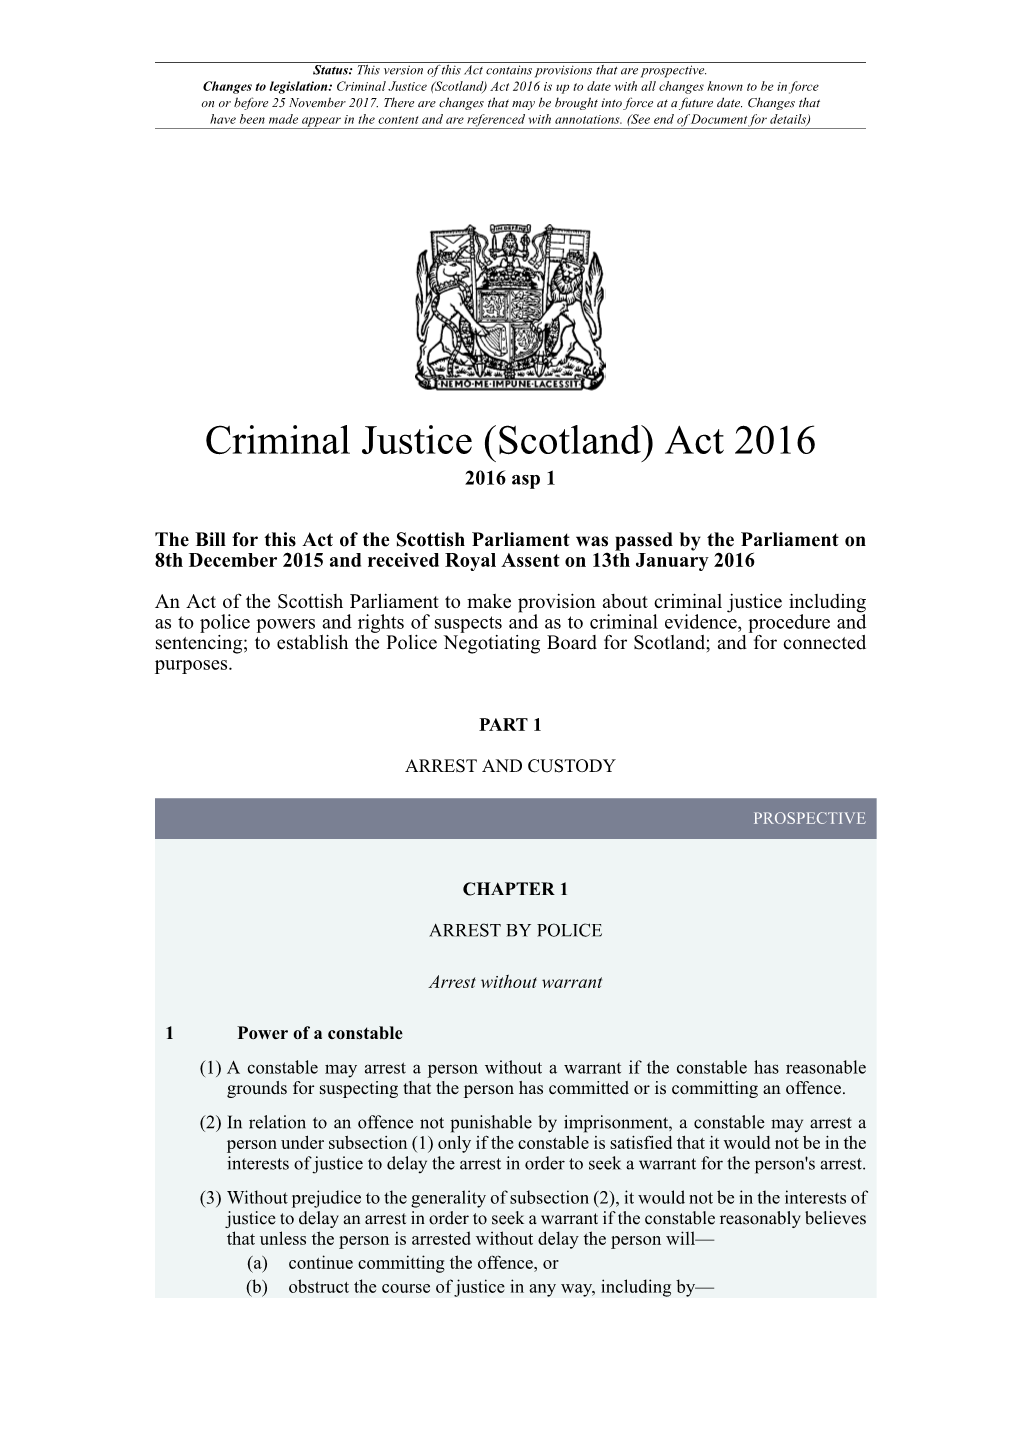 Criminal Justice (Scotland) Act 2016 Is up to Date with All Changes Known to Be in Force on Or Before 25 November 2017